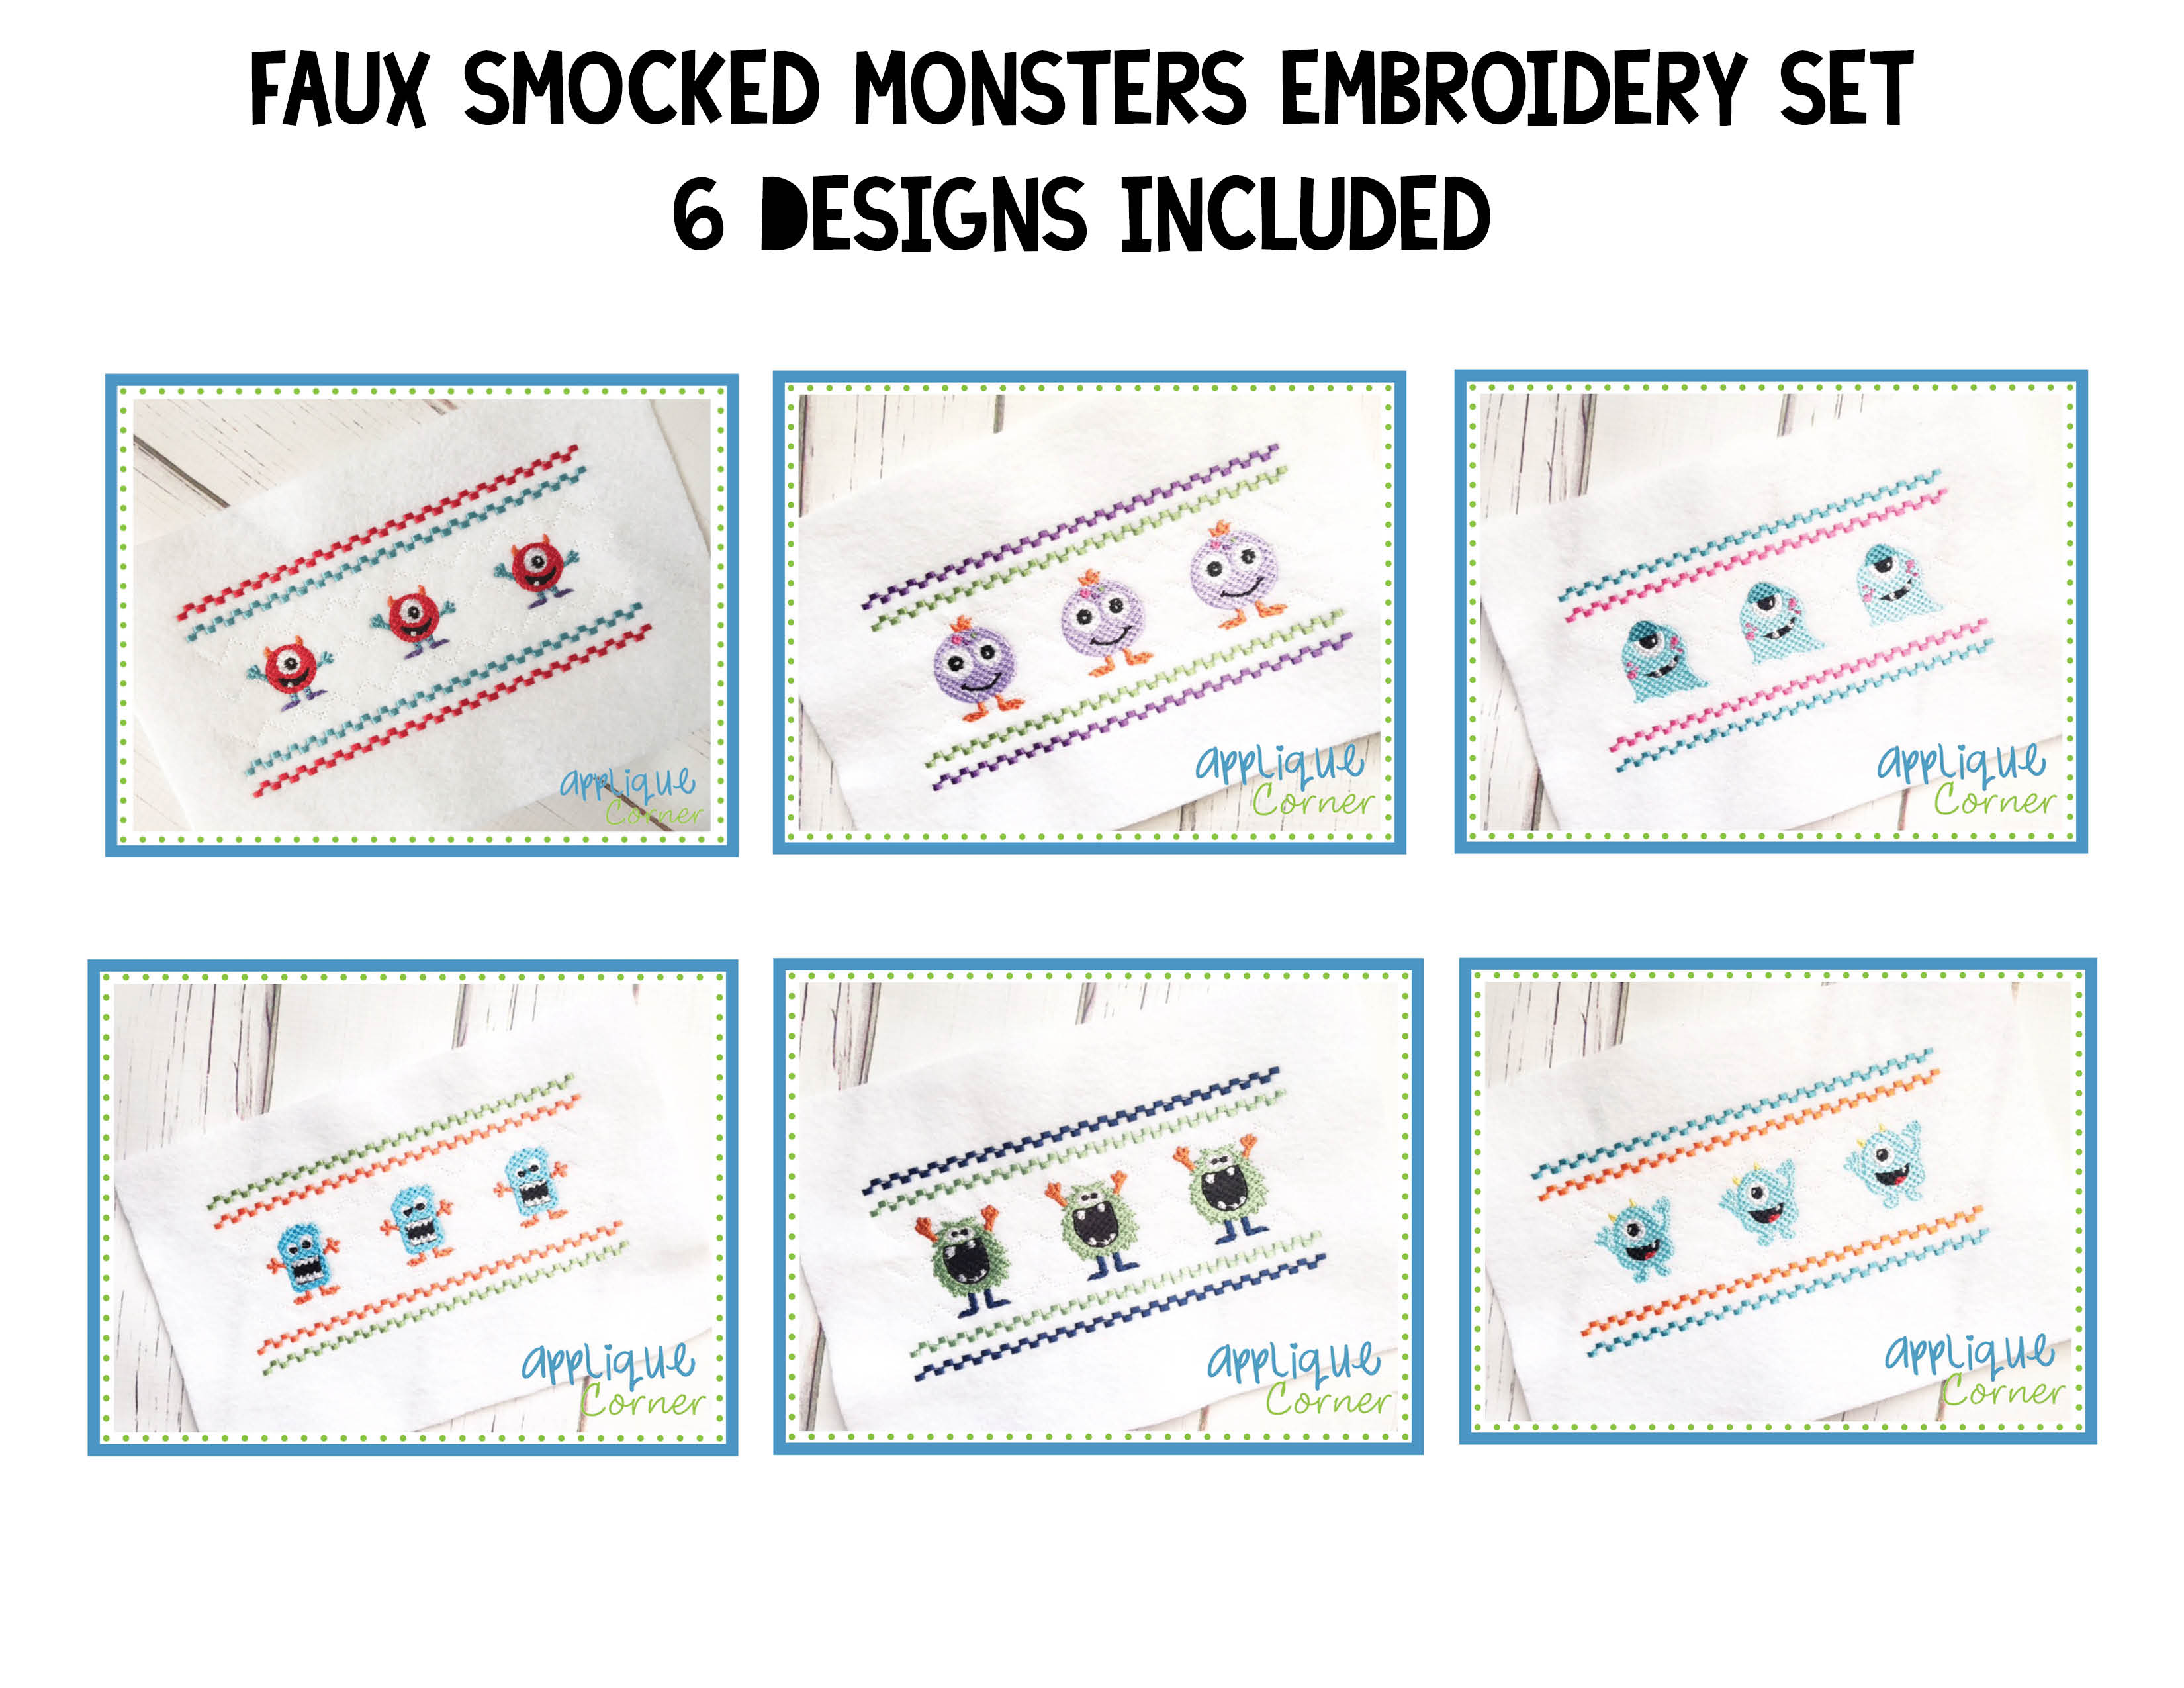 Faux Smocked Monster Set Embroidery Design